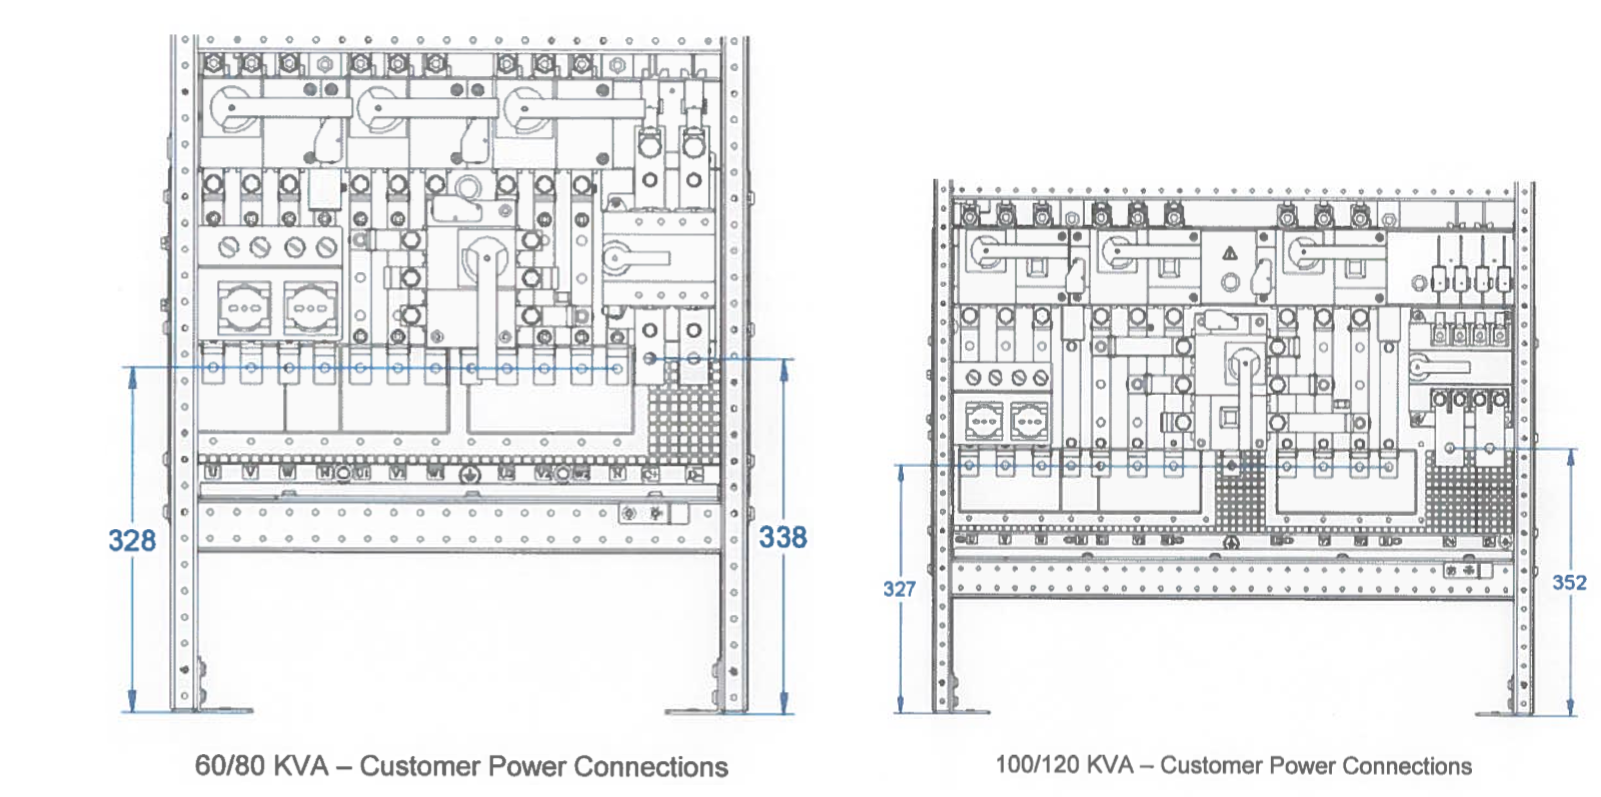 UPS customer electrical power connections